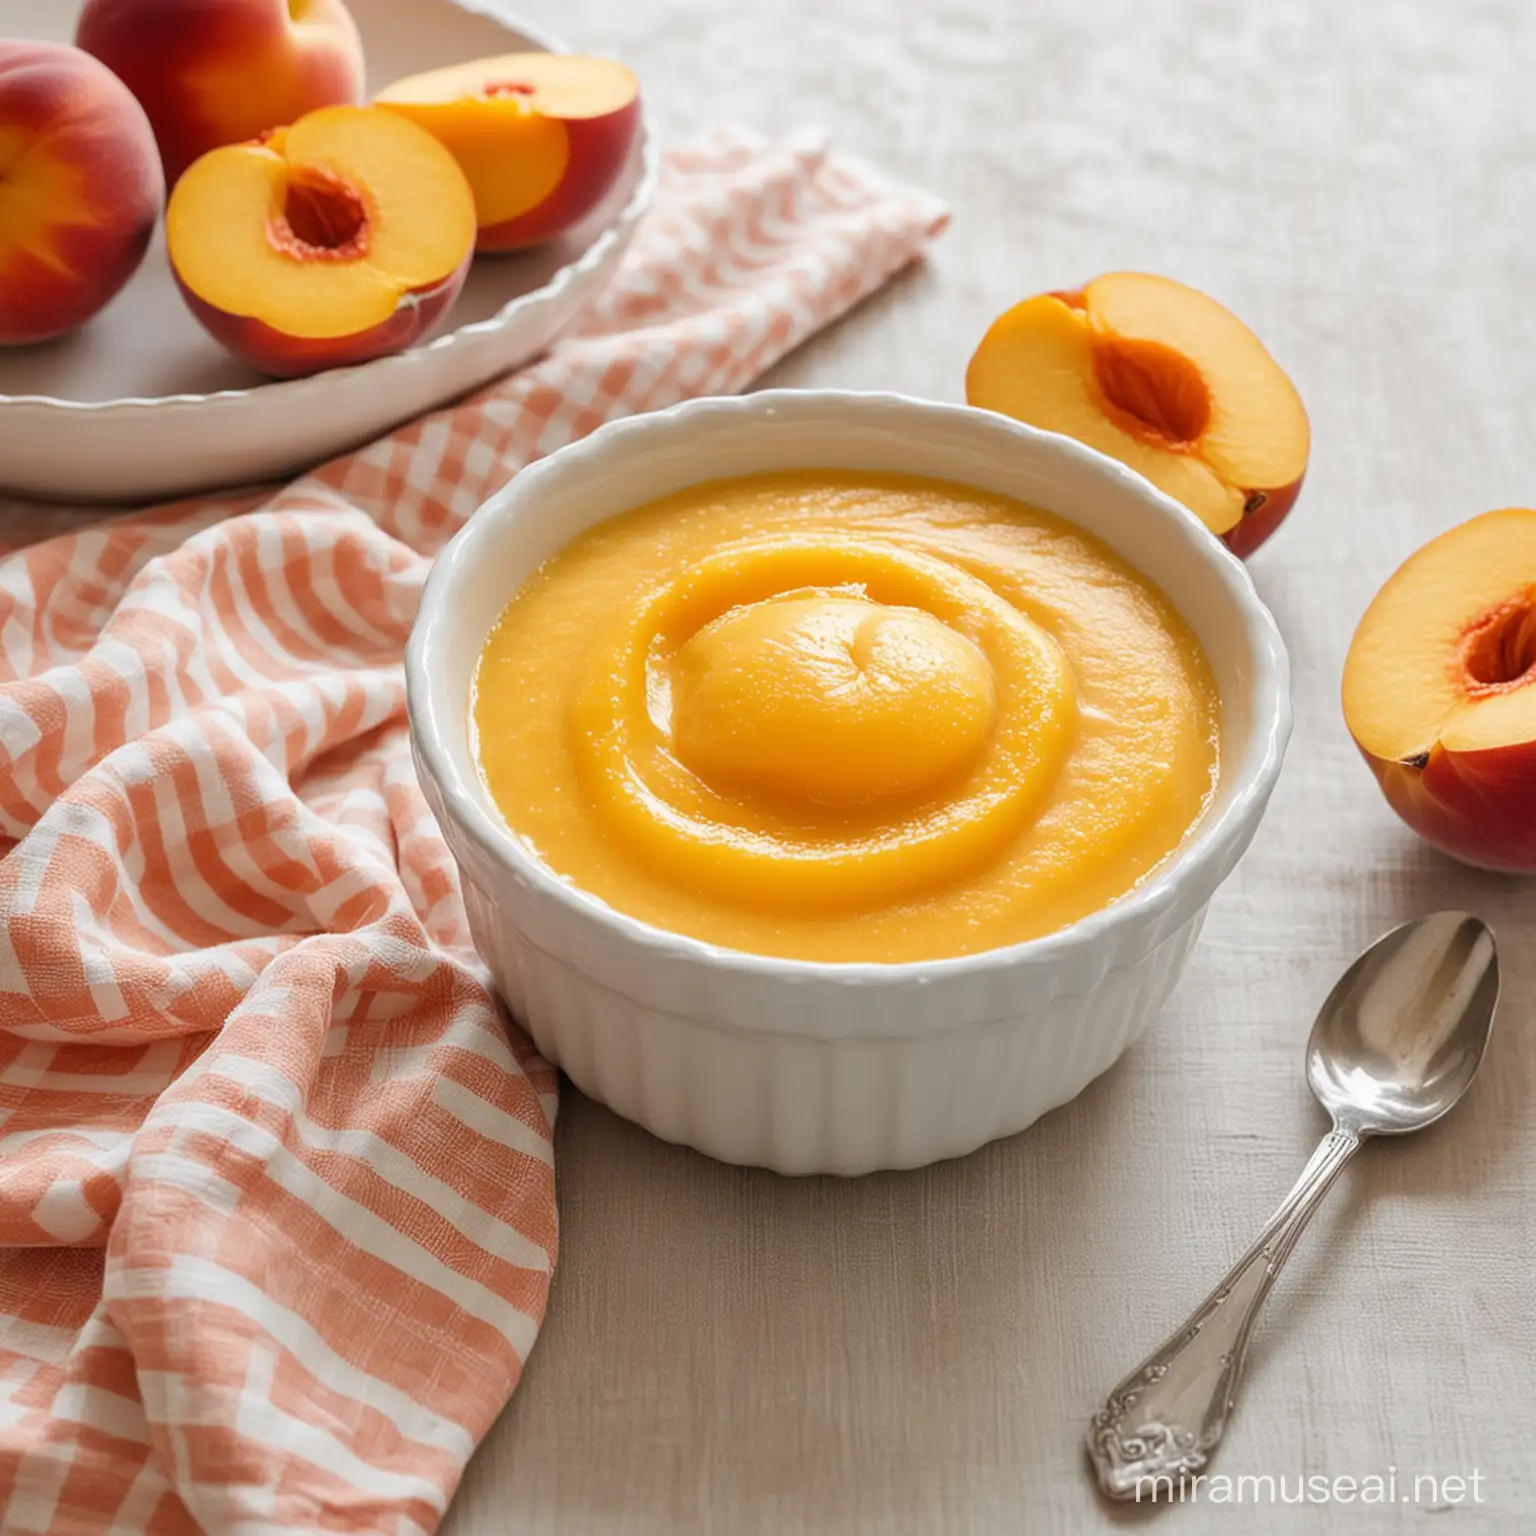 Peach Puree in a Bowl Vibrant Fruit Spread on Elegant Table Setting